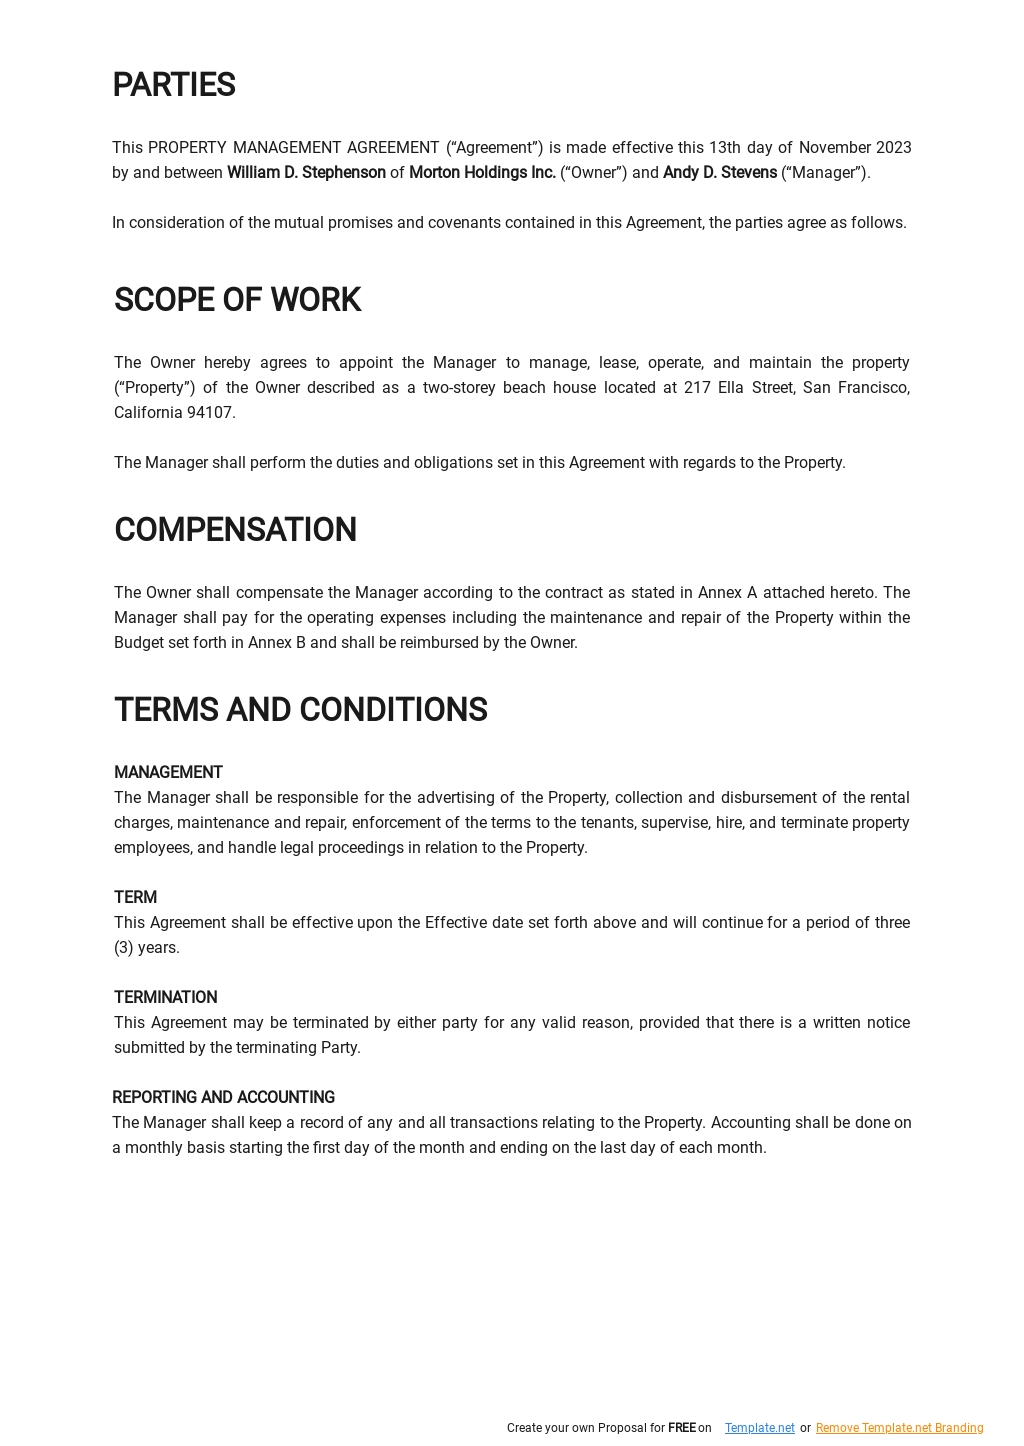 Simple Property Management Agreement Template 1.jpe